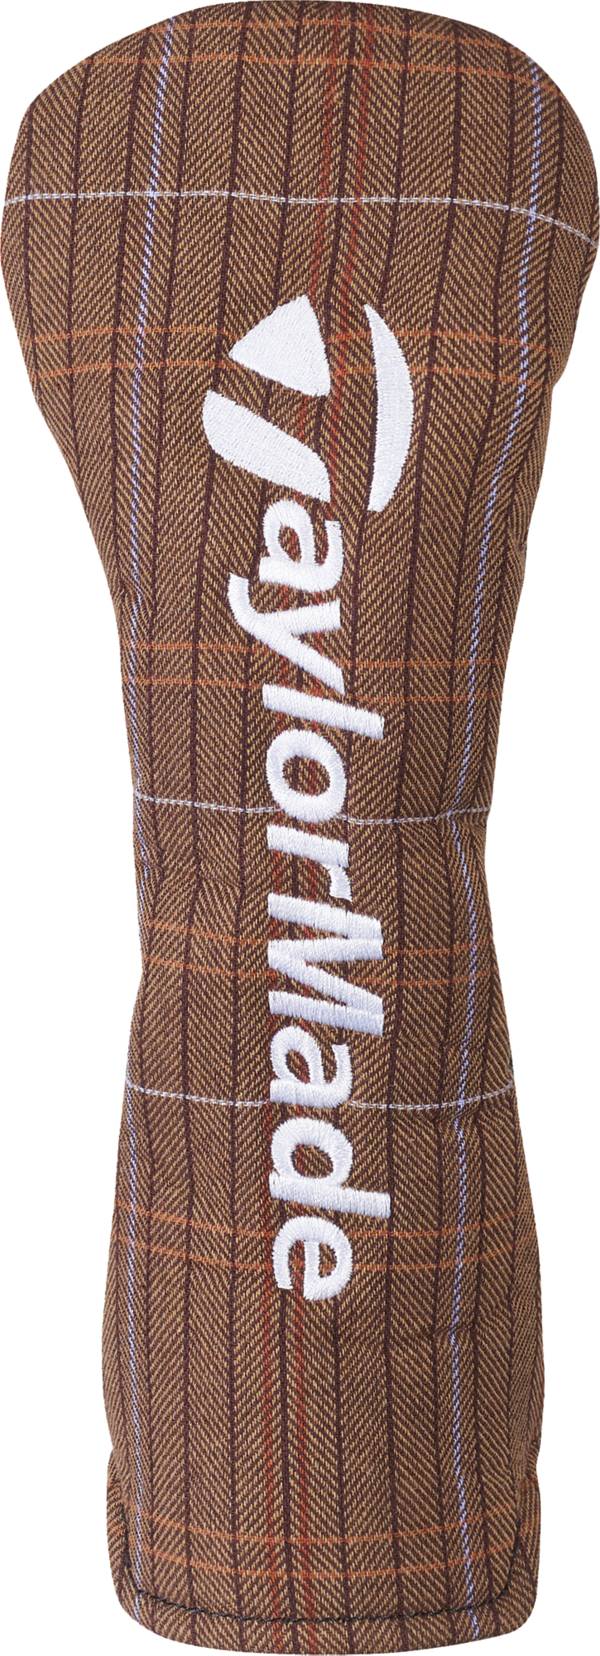 TaylorMade 2022 British Open Hybrid Headcover product image